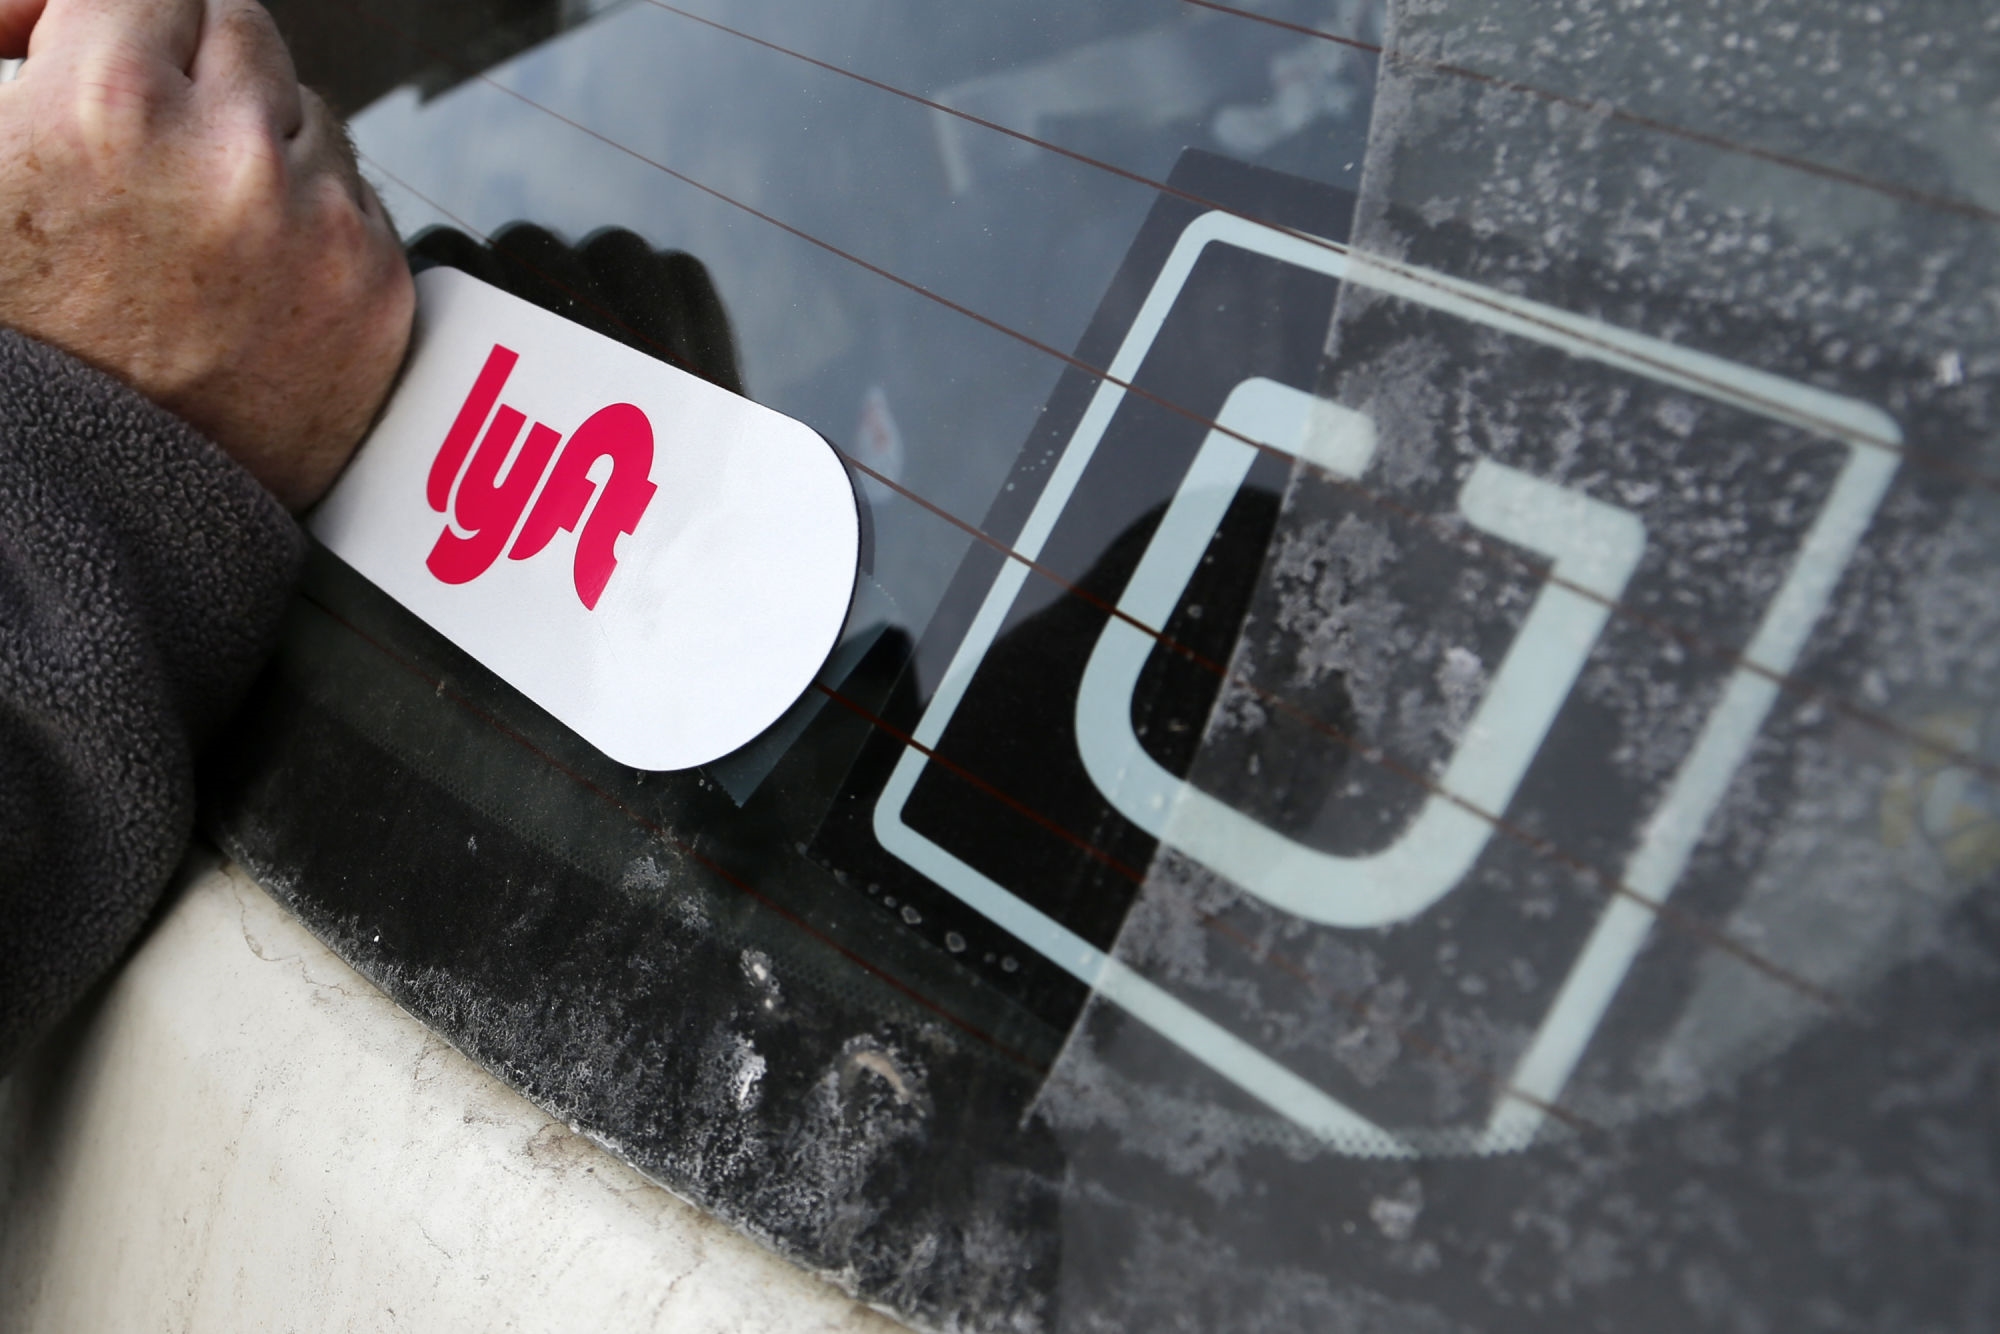 Lyft will deliver food and medical supplies during the coronavirus crisis | DeviceDaily.com